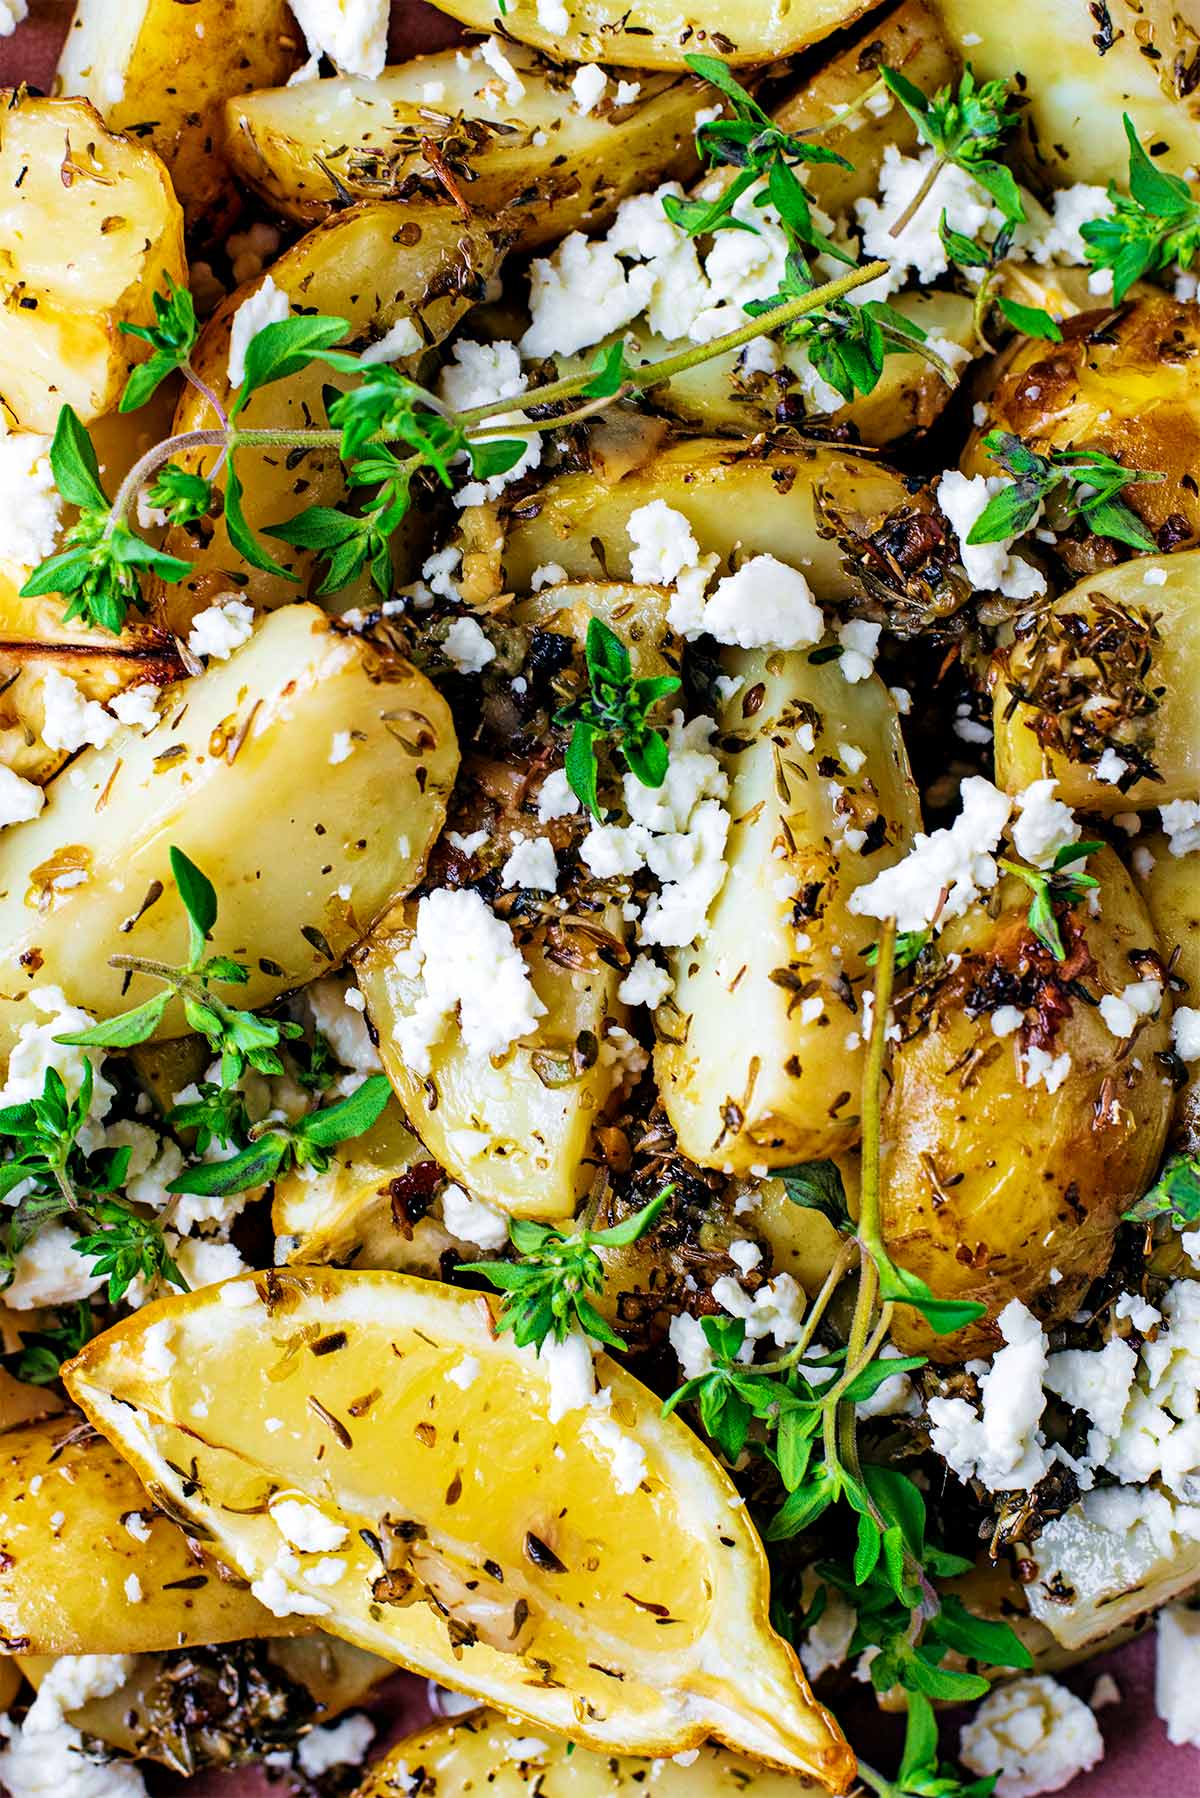 Cooked new potatoes covered in seasoning and sprinkled with feta.